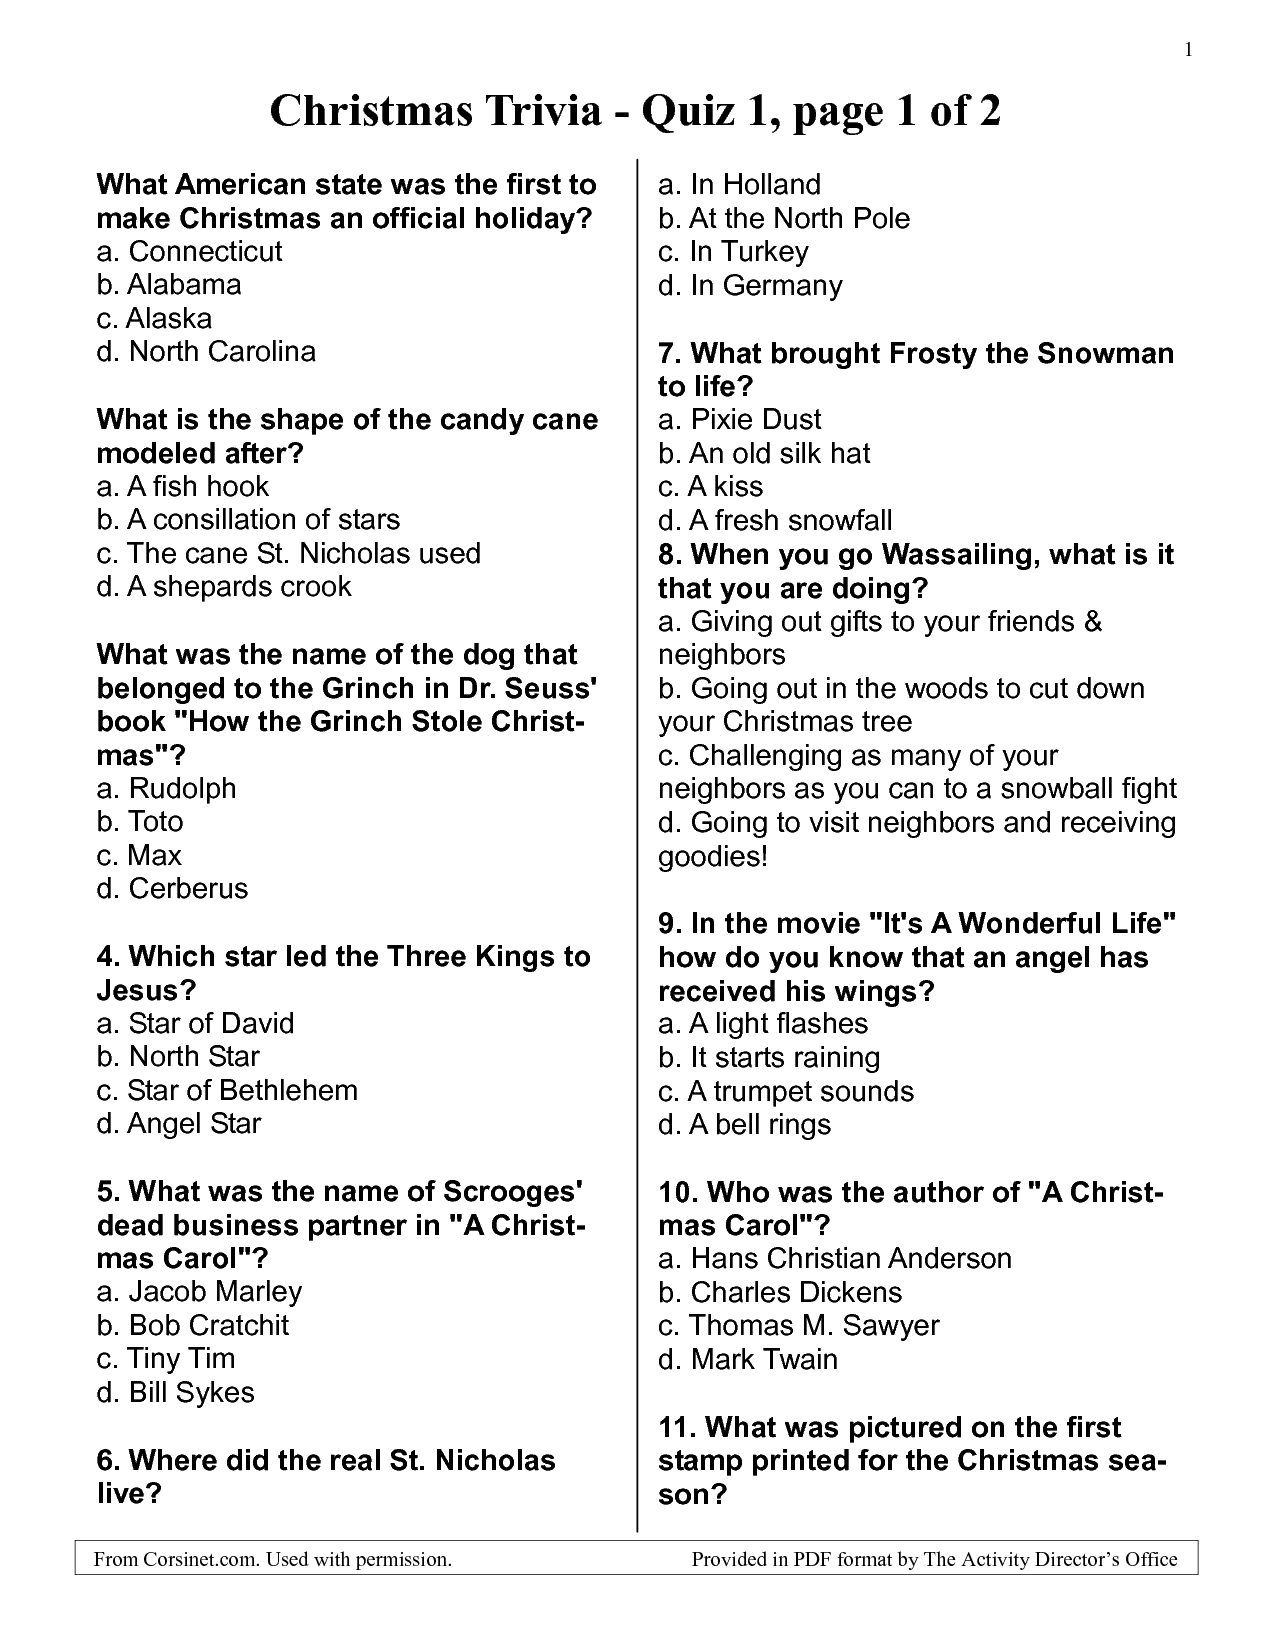 Free Printable Bible Trivia Questions And Answers Free Printable